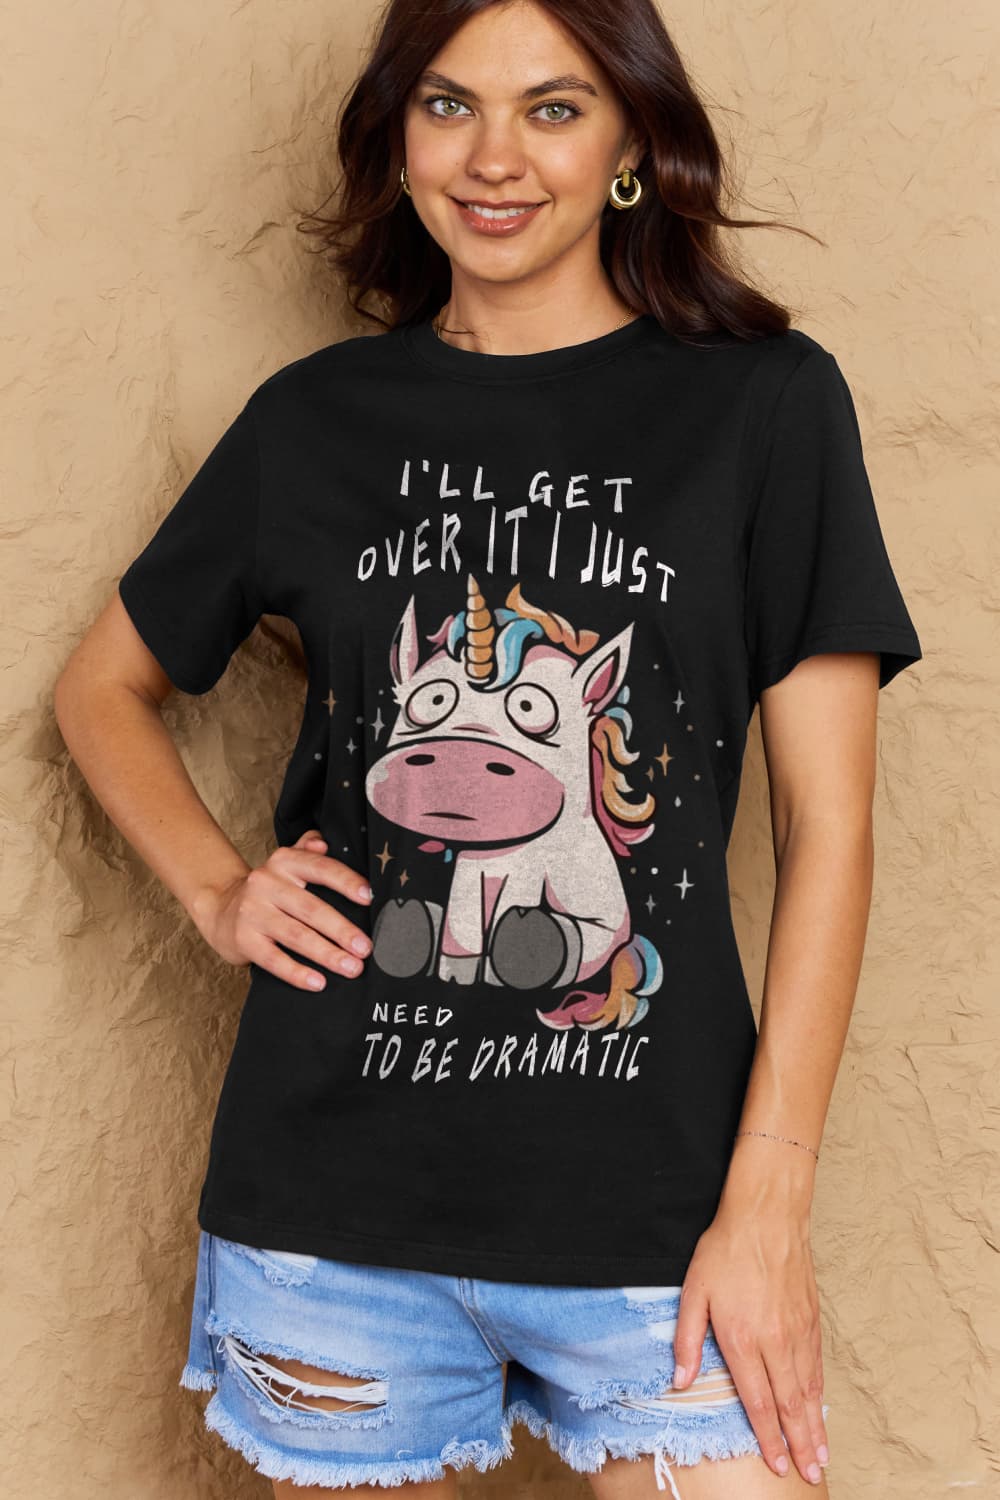 Full Size I’LL GET OVER IT I JUST NEED TO BE DRAMATIC Graphic Cotton Tee - T-Shirts - Shirts & Tops - 1 - 2024